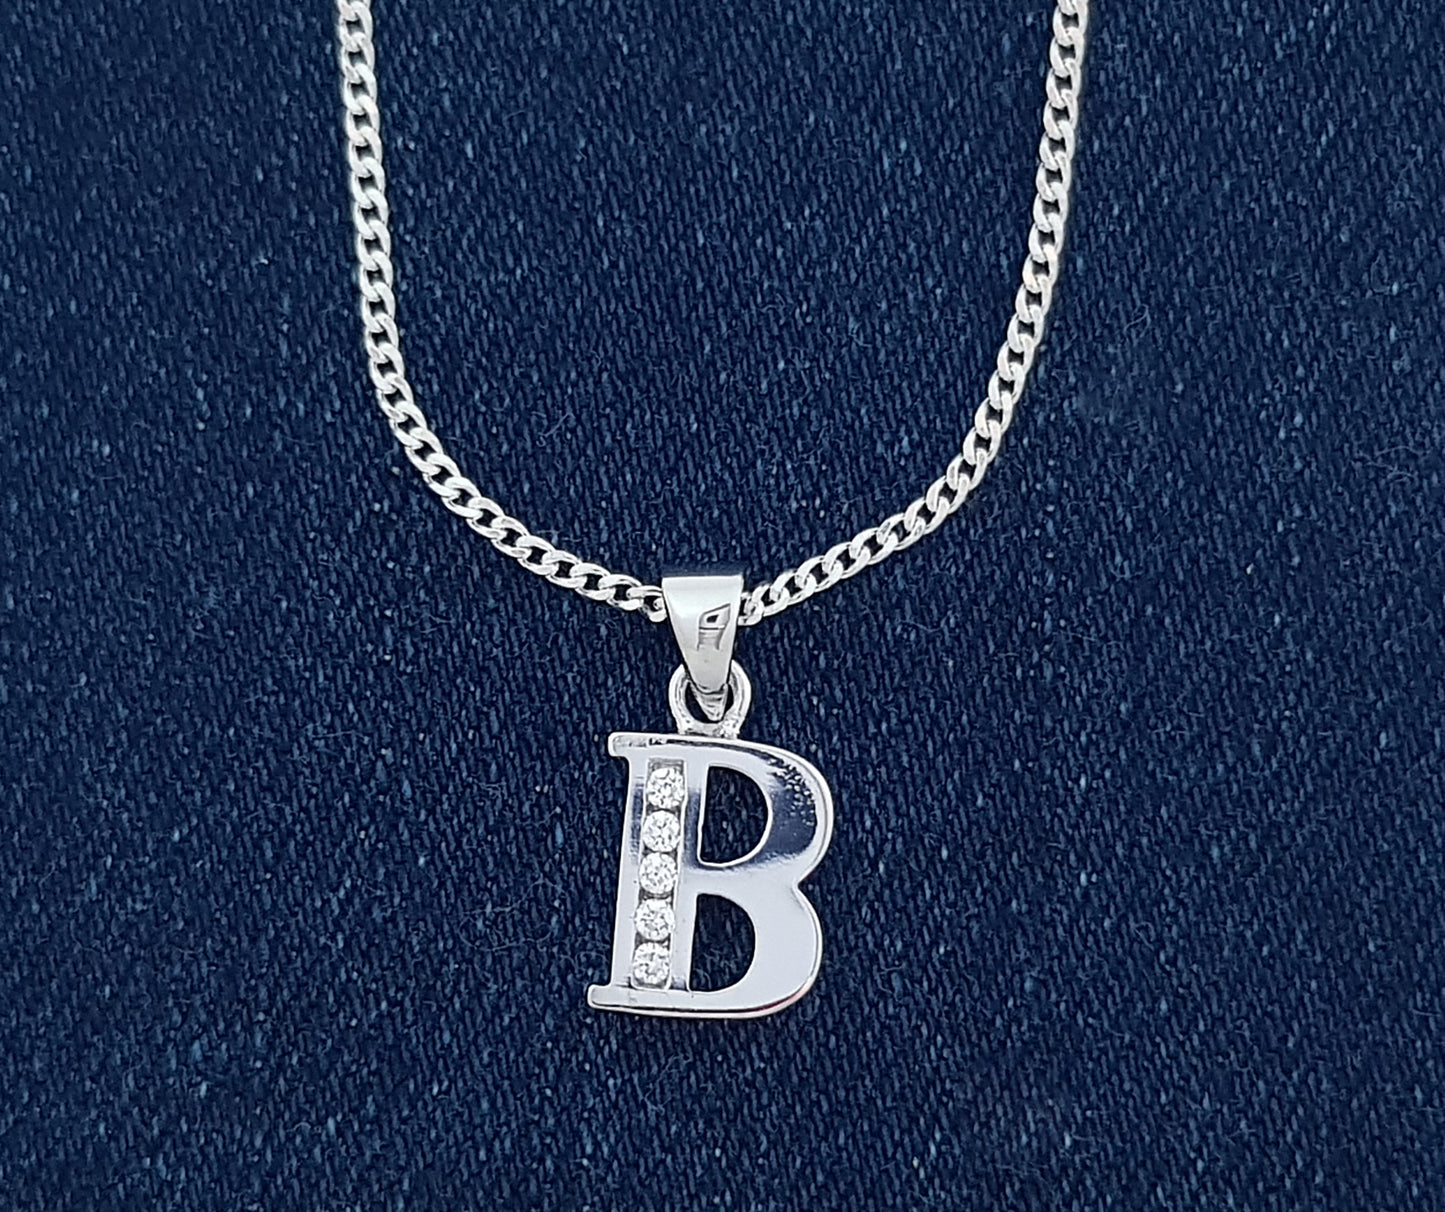 Sterling Silver Initial with Cubic Zirconia Stones- "B" Initial or Letter